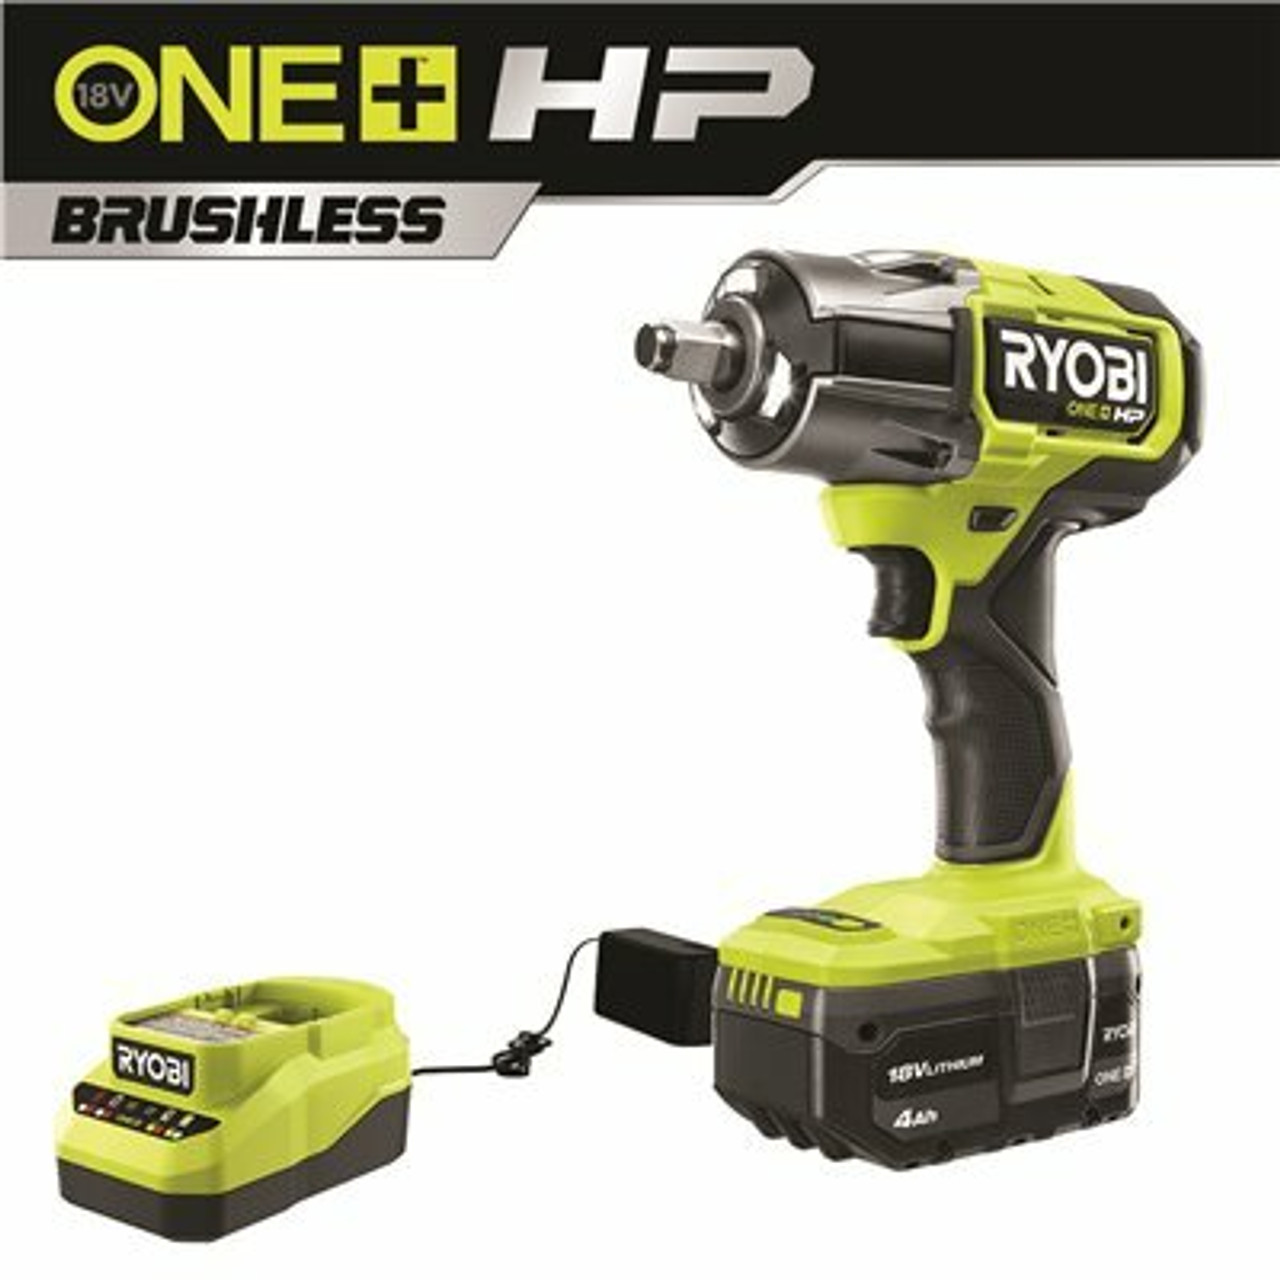 Ryobi One+ Hp 18V Brushless Cordless 4-Mode 1/2 In. Impact Wrench Kit With (1) 4.0 Ah Battery And Charger